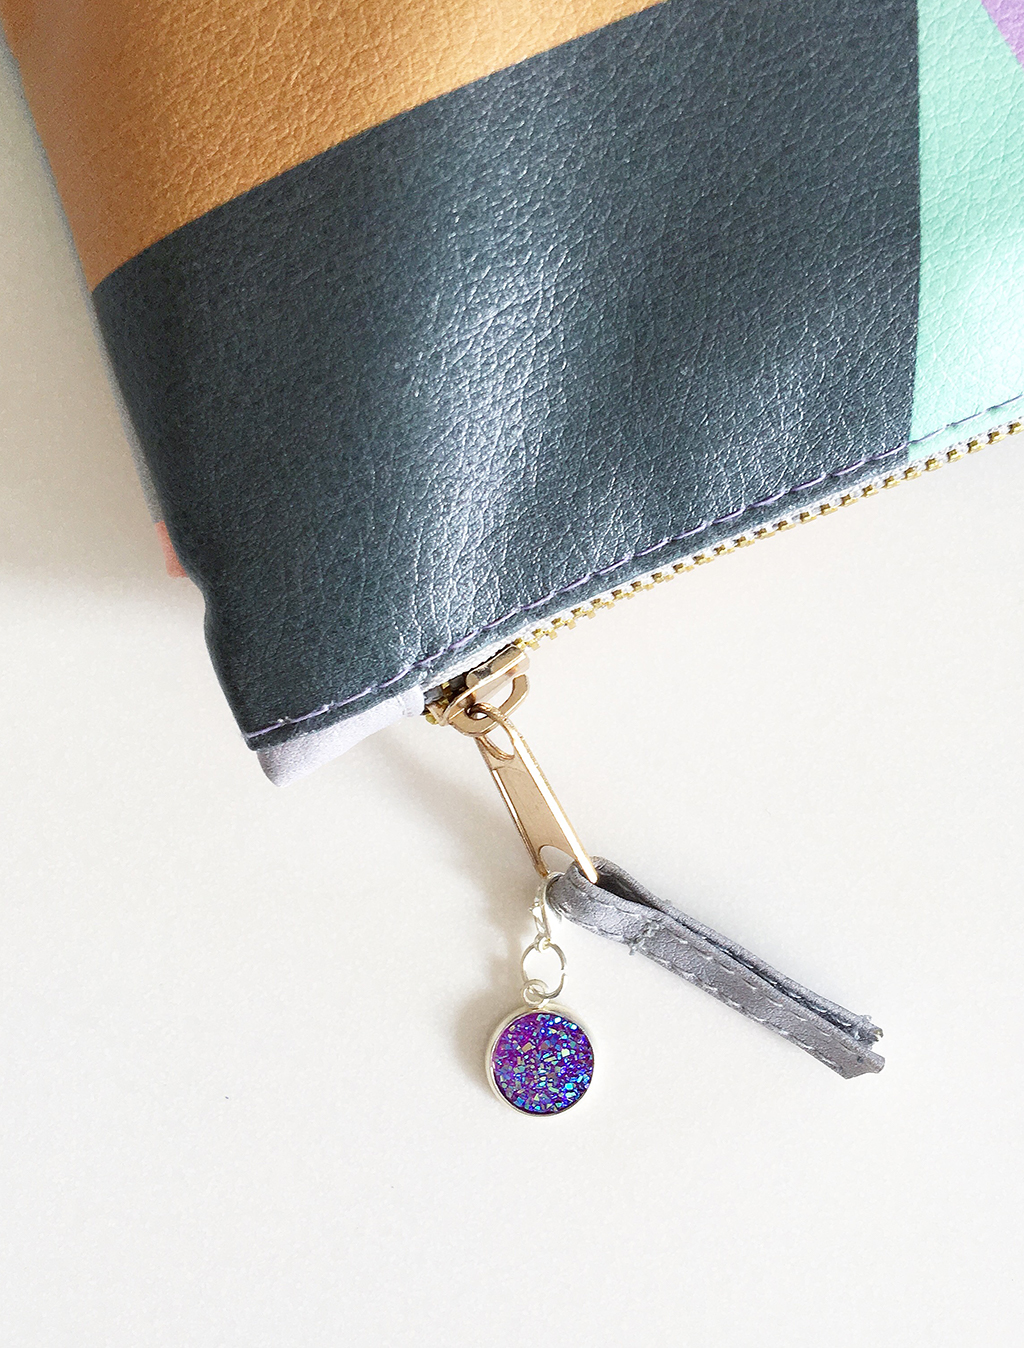 Decorate your pencil case zipper with a planner charm